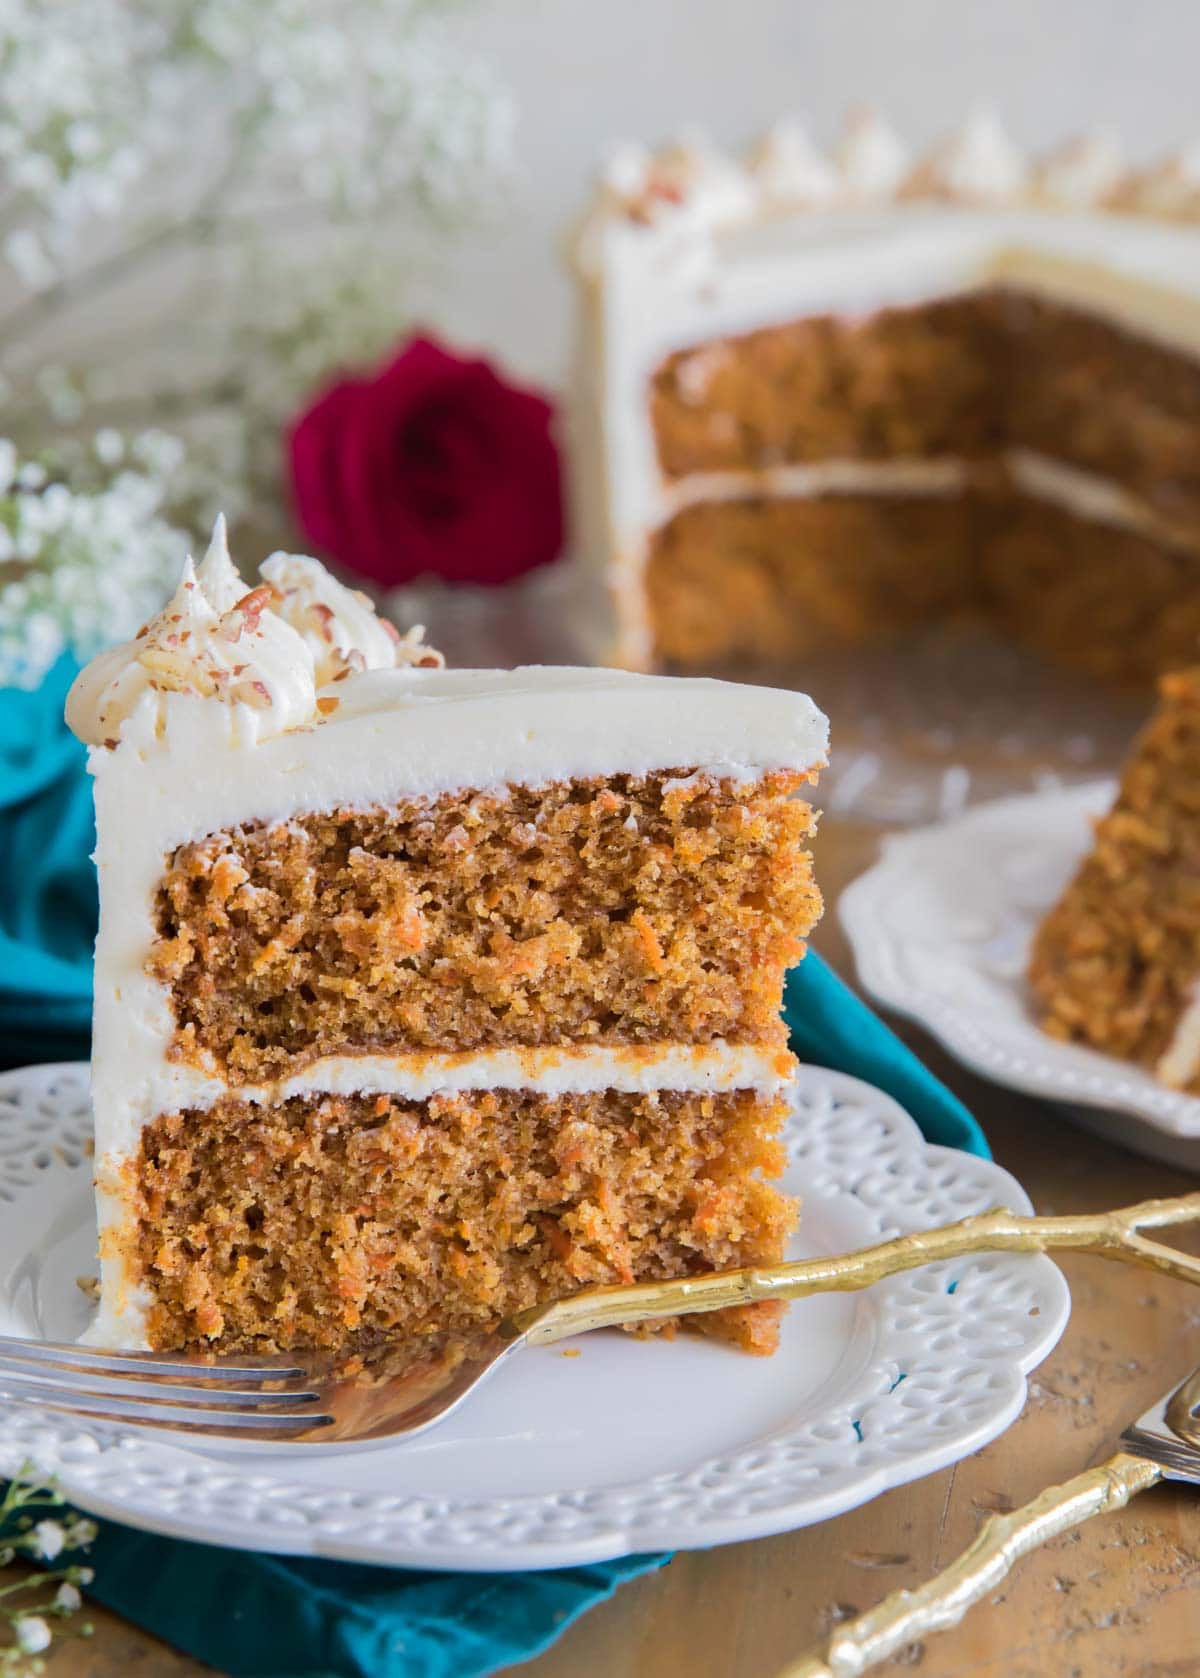 a slice of frosted carrot cake on a white plate with the rest of the cake in the background